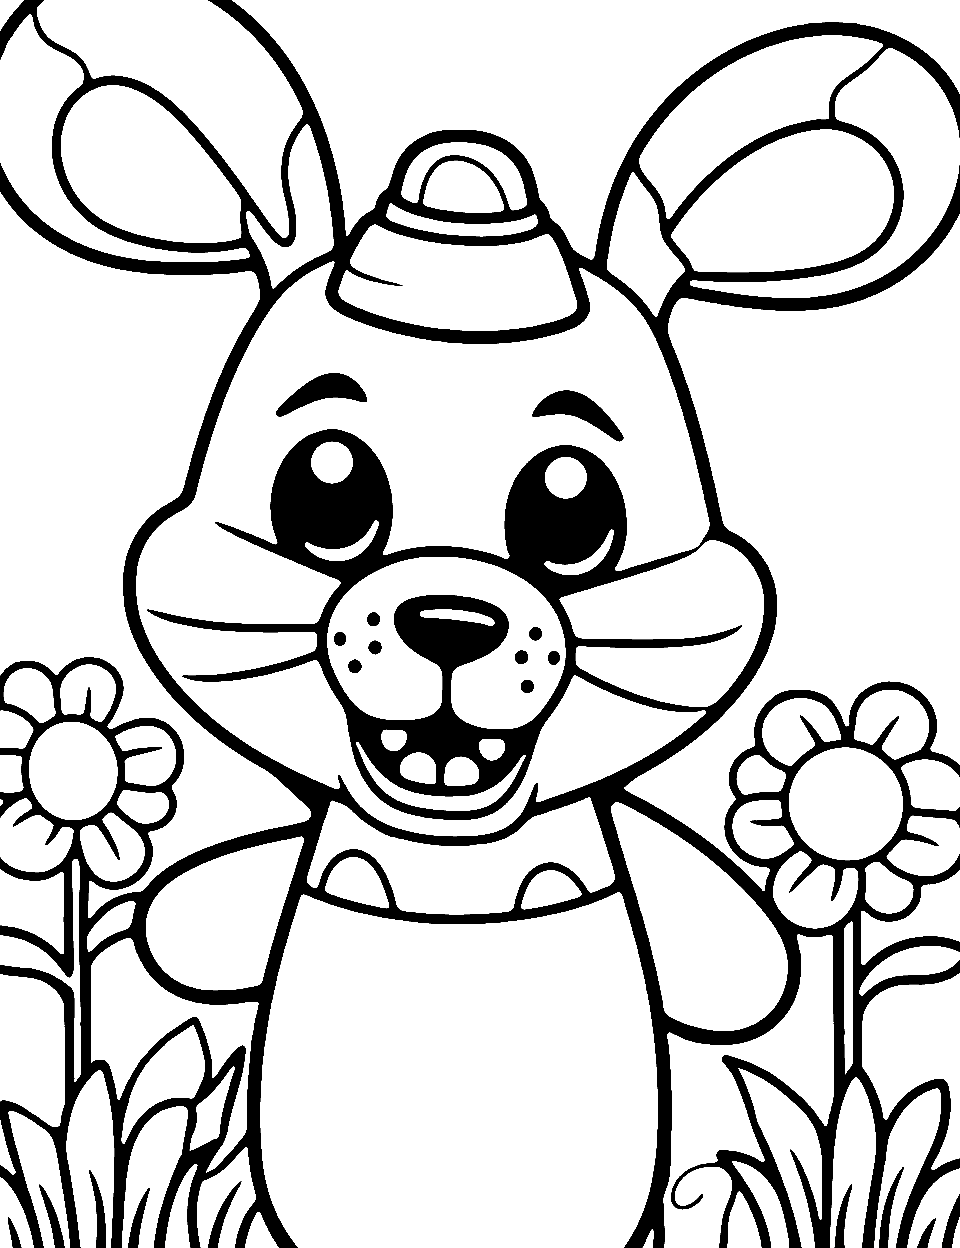 Spring Bonnie Coloring Page - Spring Bonnie in a meadow with simple flowers.